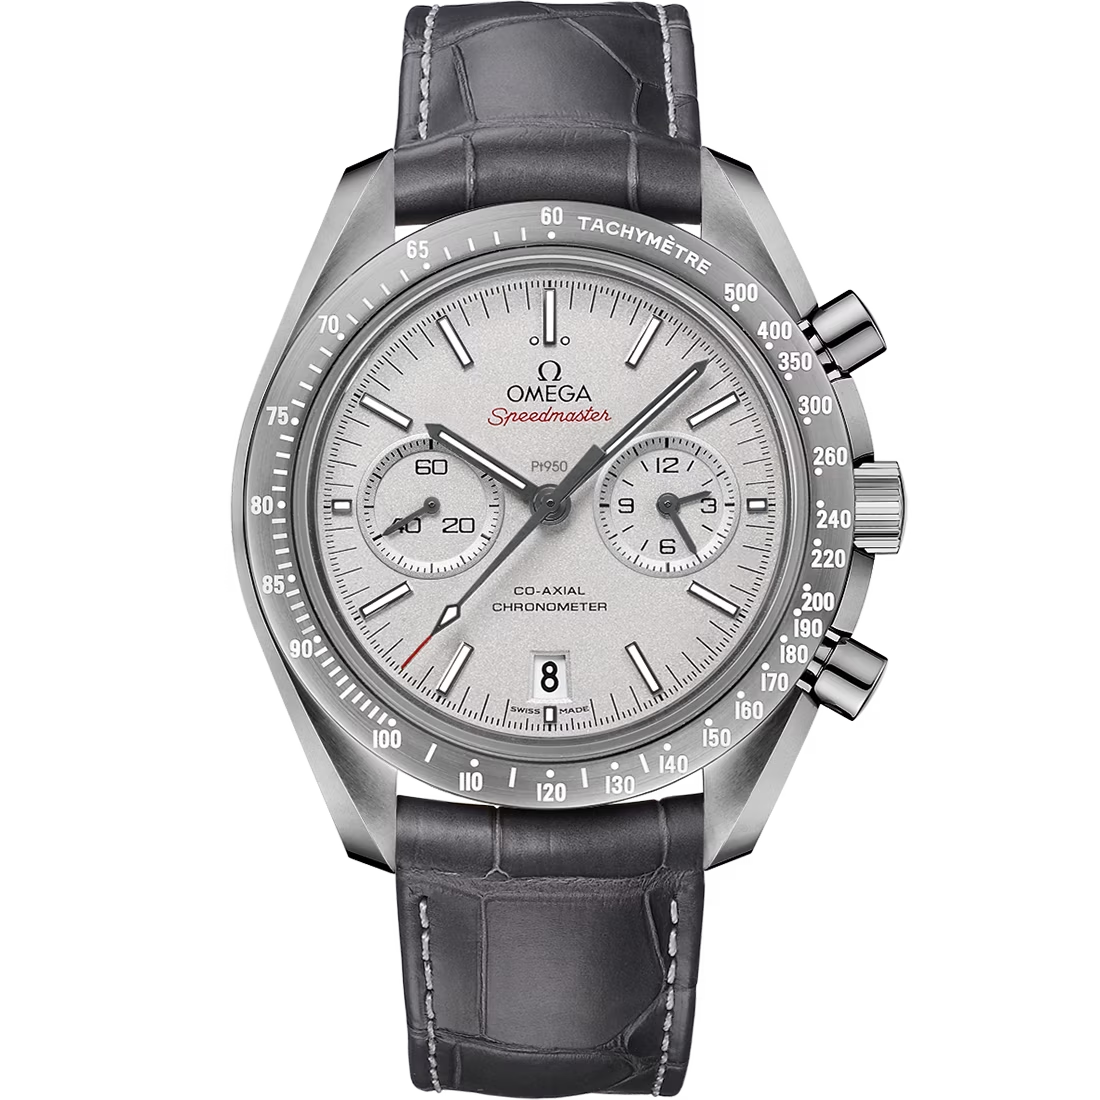 OMEGA- SPEEDMASTER
DARK SIDE OF THE MOON
44.25 MM, GREY CERAMIC ON LEATHER STRAP WITH FOLDOVER CLASP  311.93.44.51.99.002